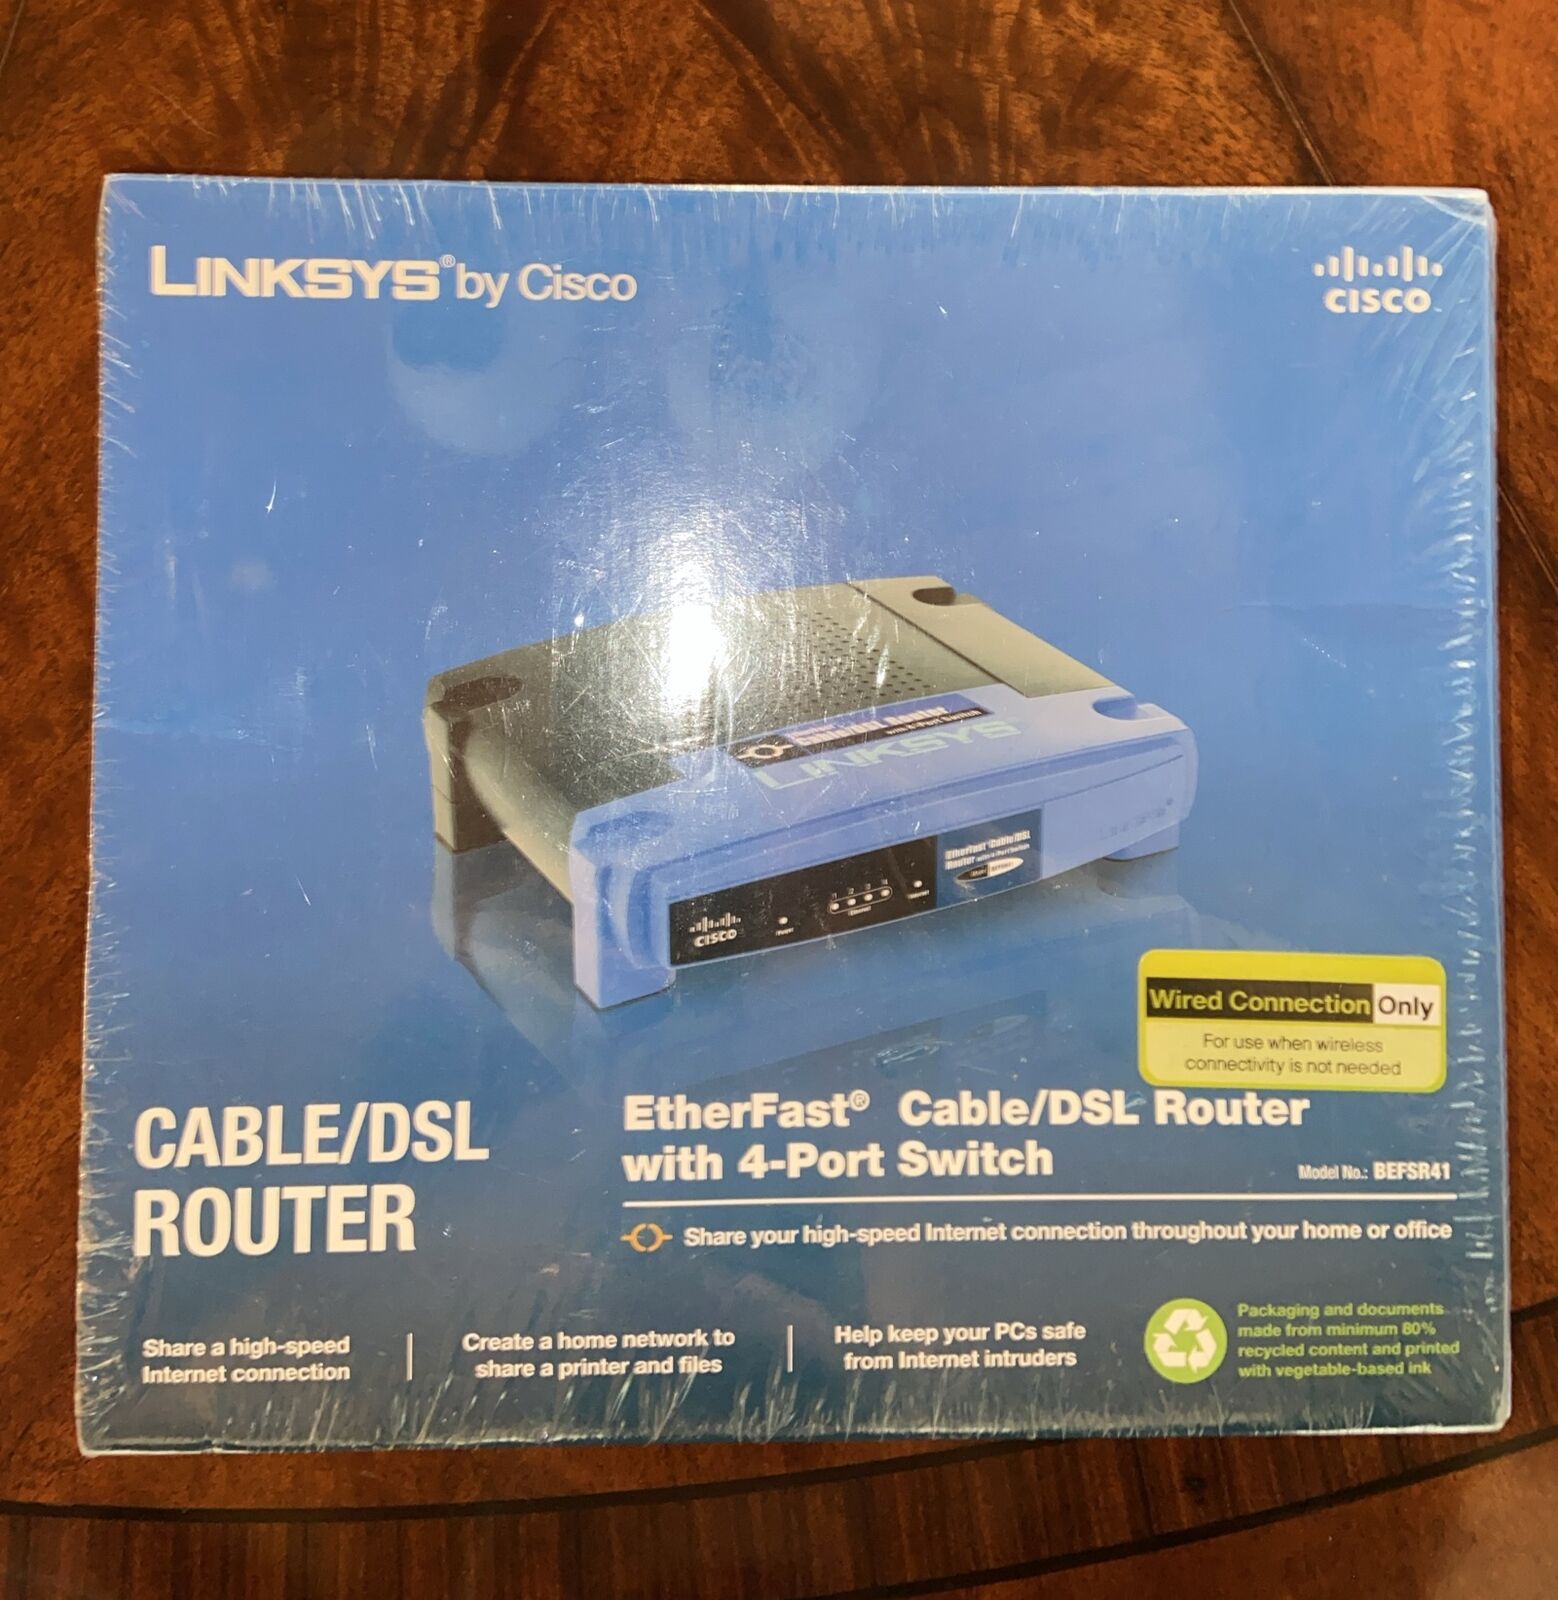 LINKSYS BY CISCO CABLE/DSL ROUTER ETHER FAST MODEL BEFSR41 NEW SEALED